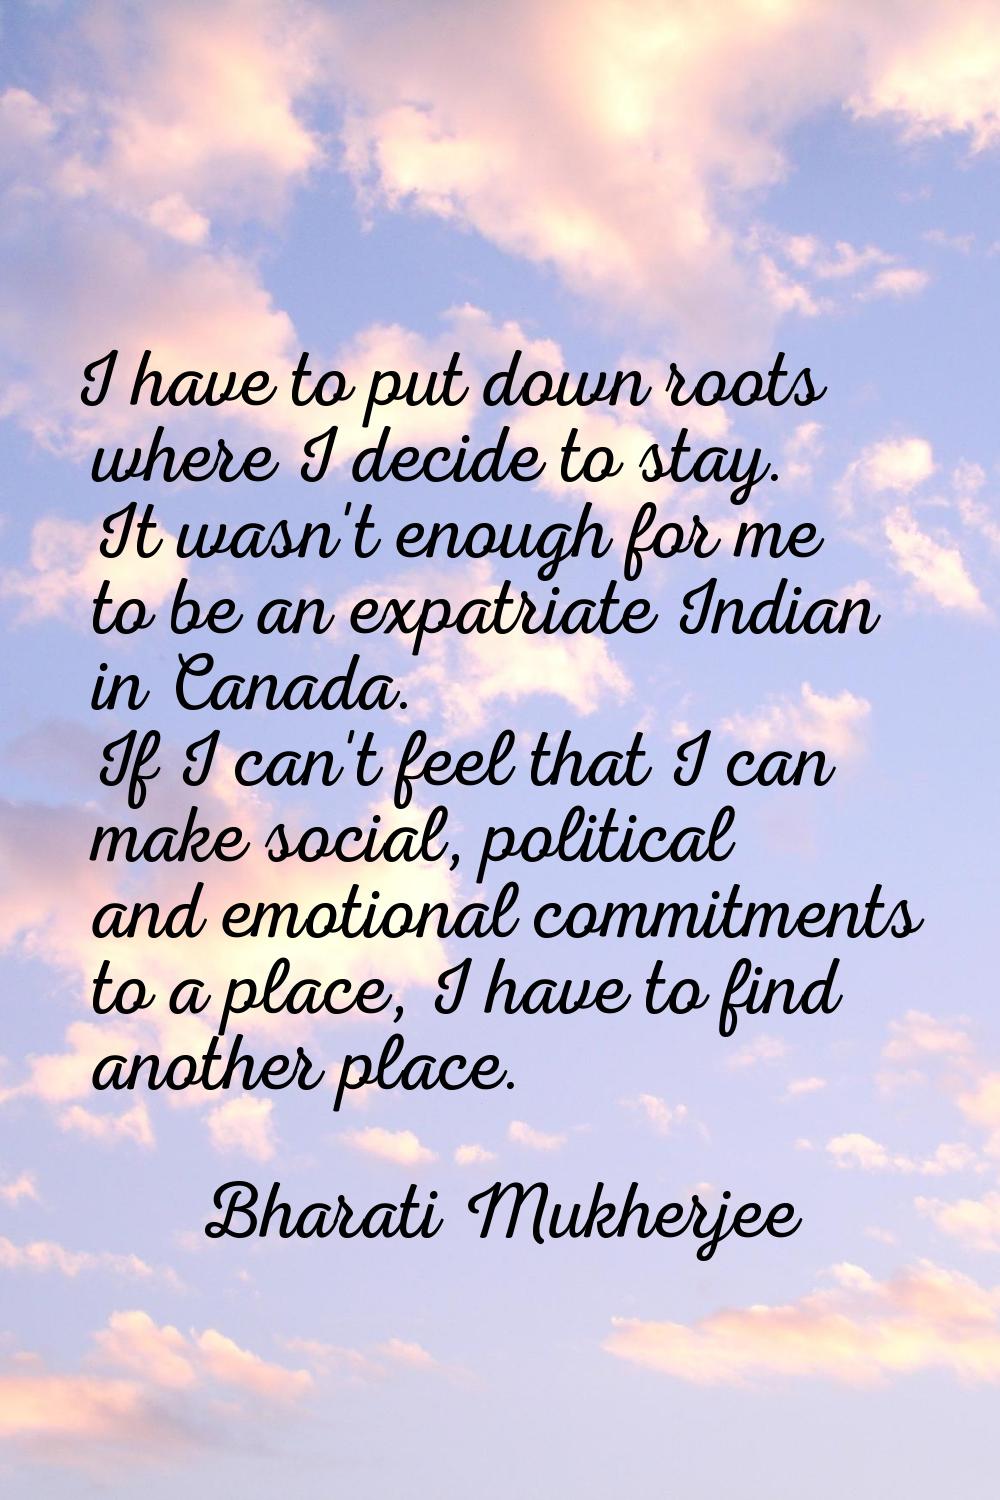 I have to put down roots where I decide to stay. It wasn't enough for me to be an expatriate Indian